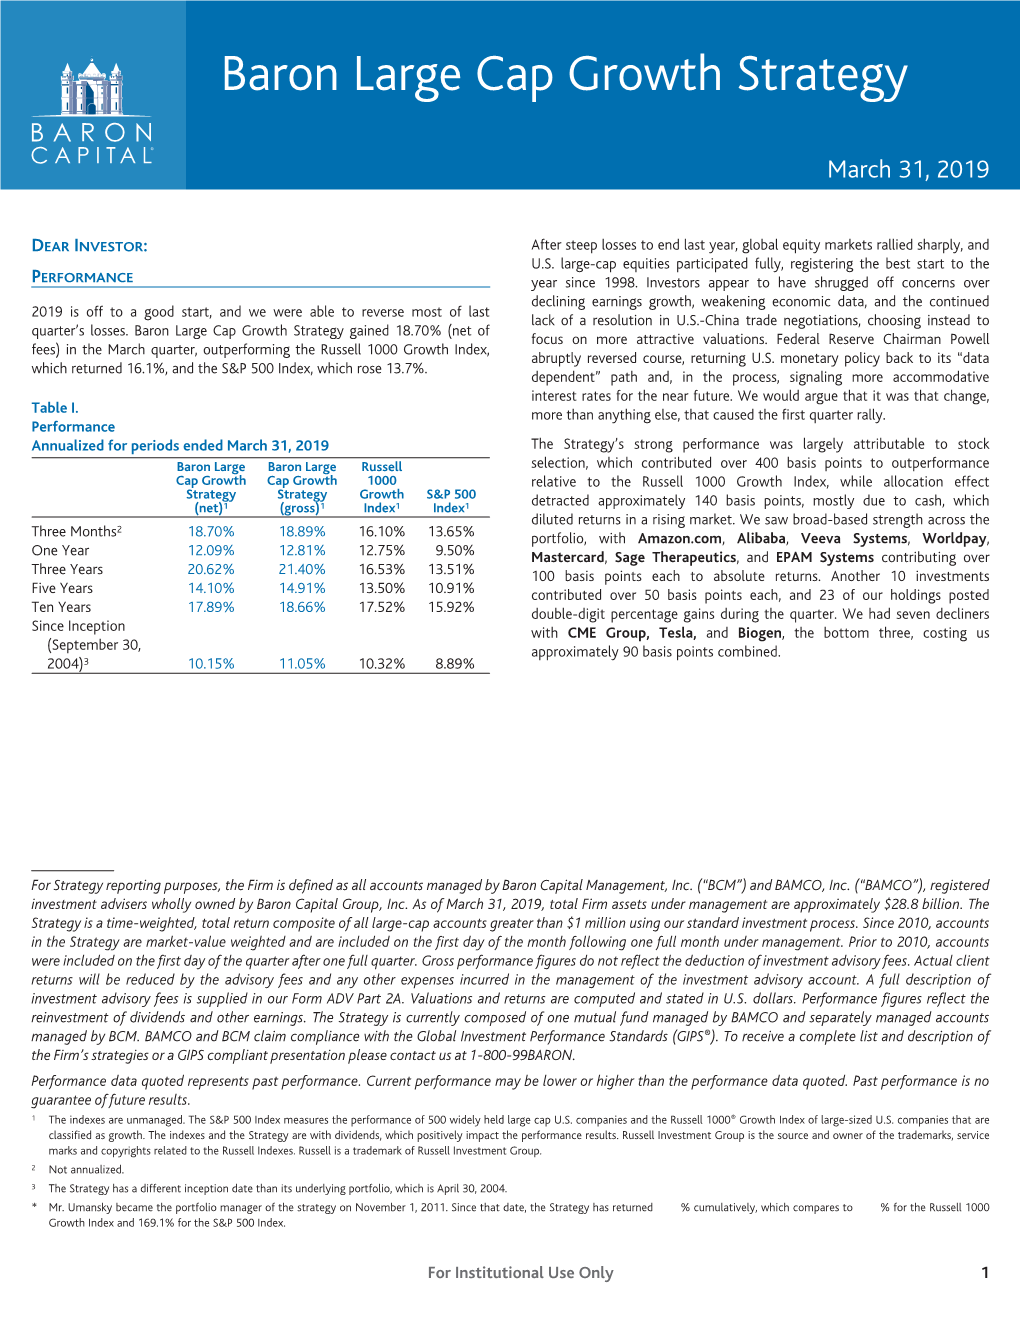 1Q19 Baron Large Cap Growth Strategy Letter